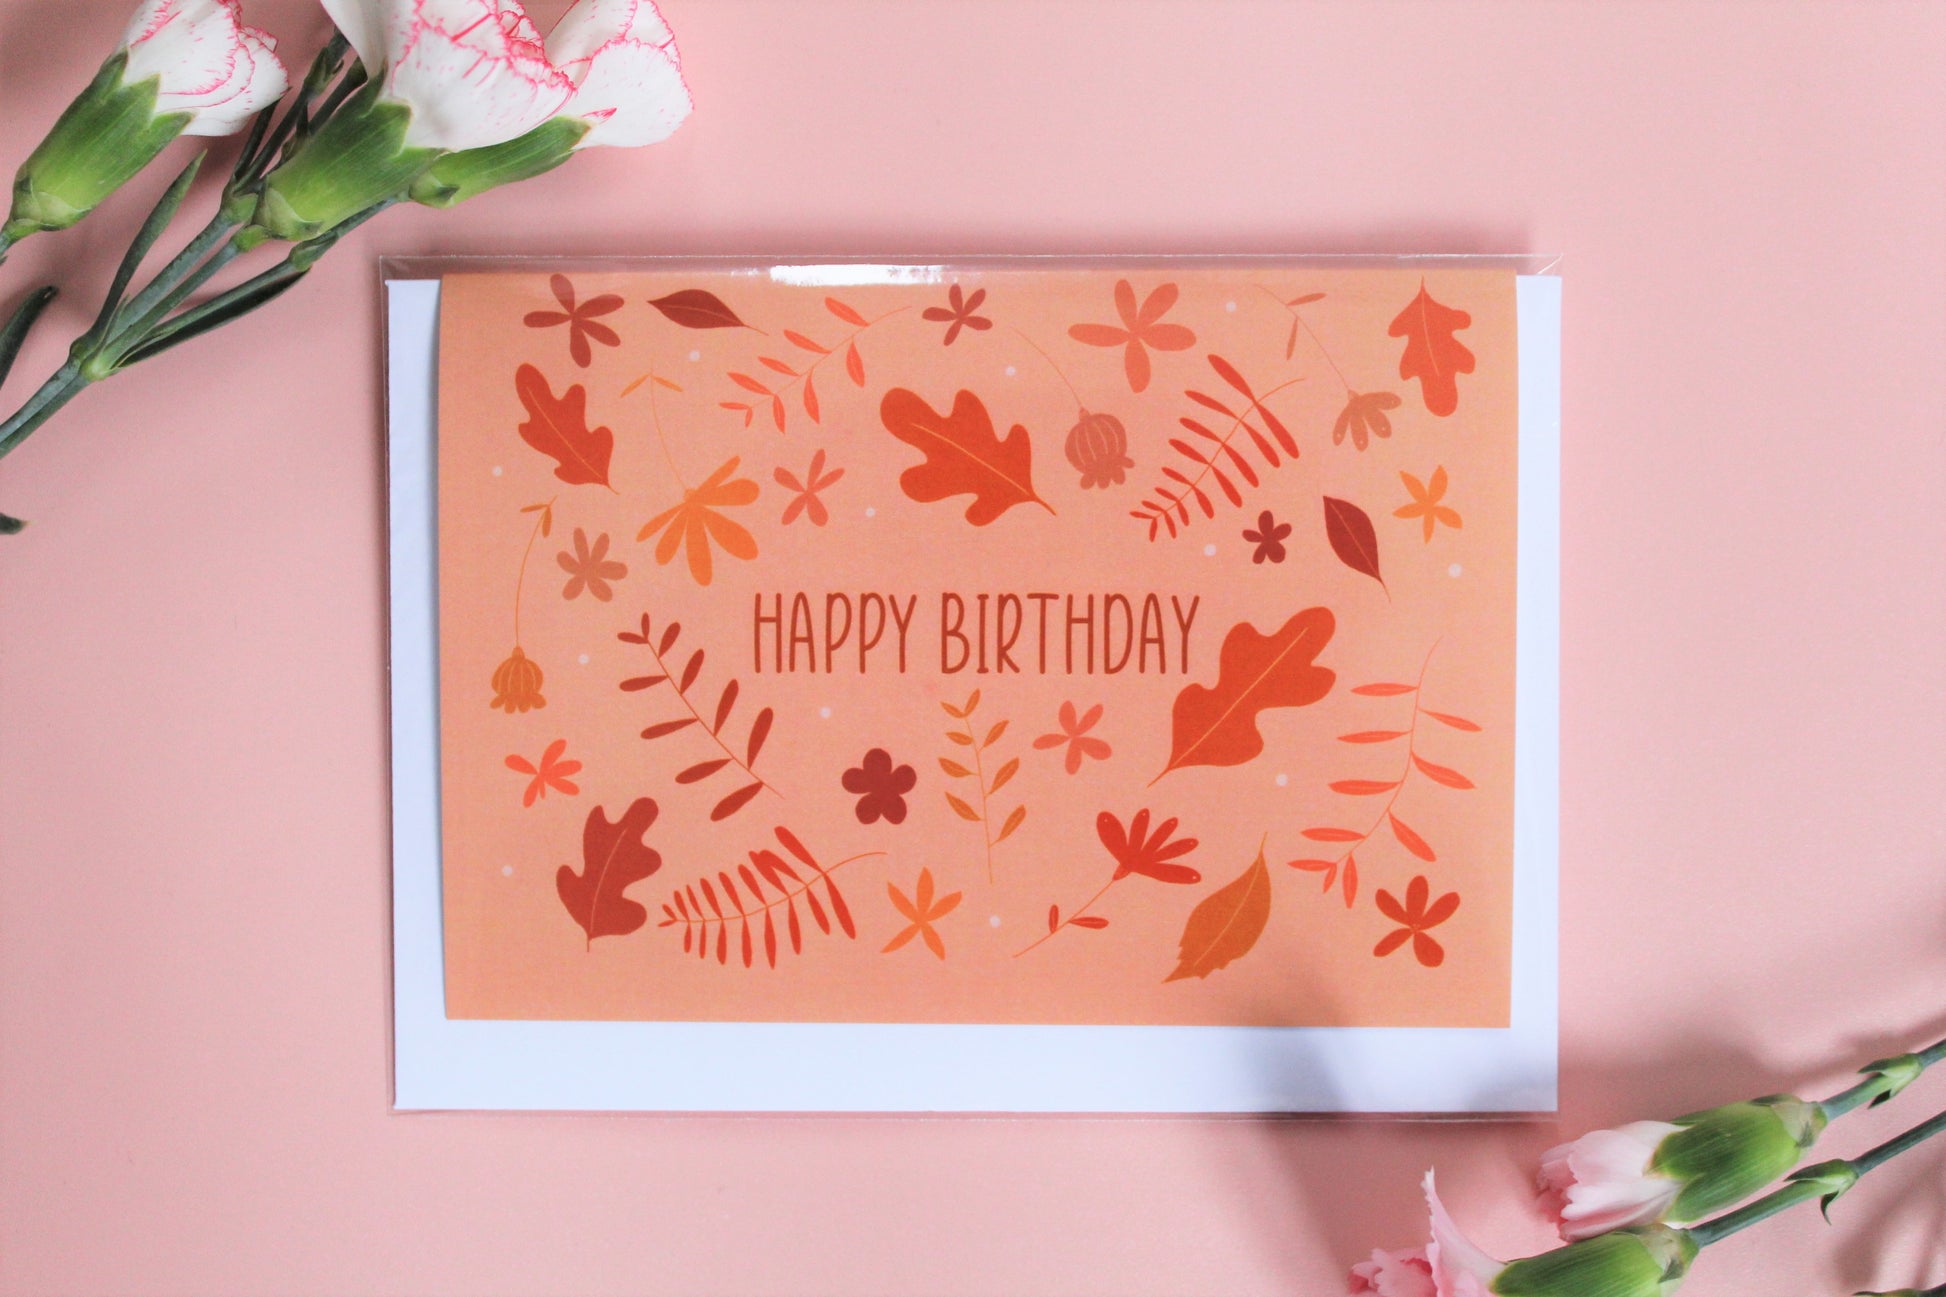 "Happy Birthday" greetings card with peach background with an autumnal colour foliage pattern